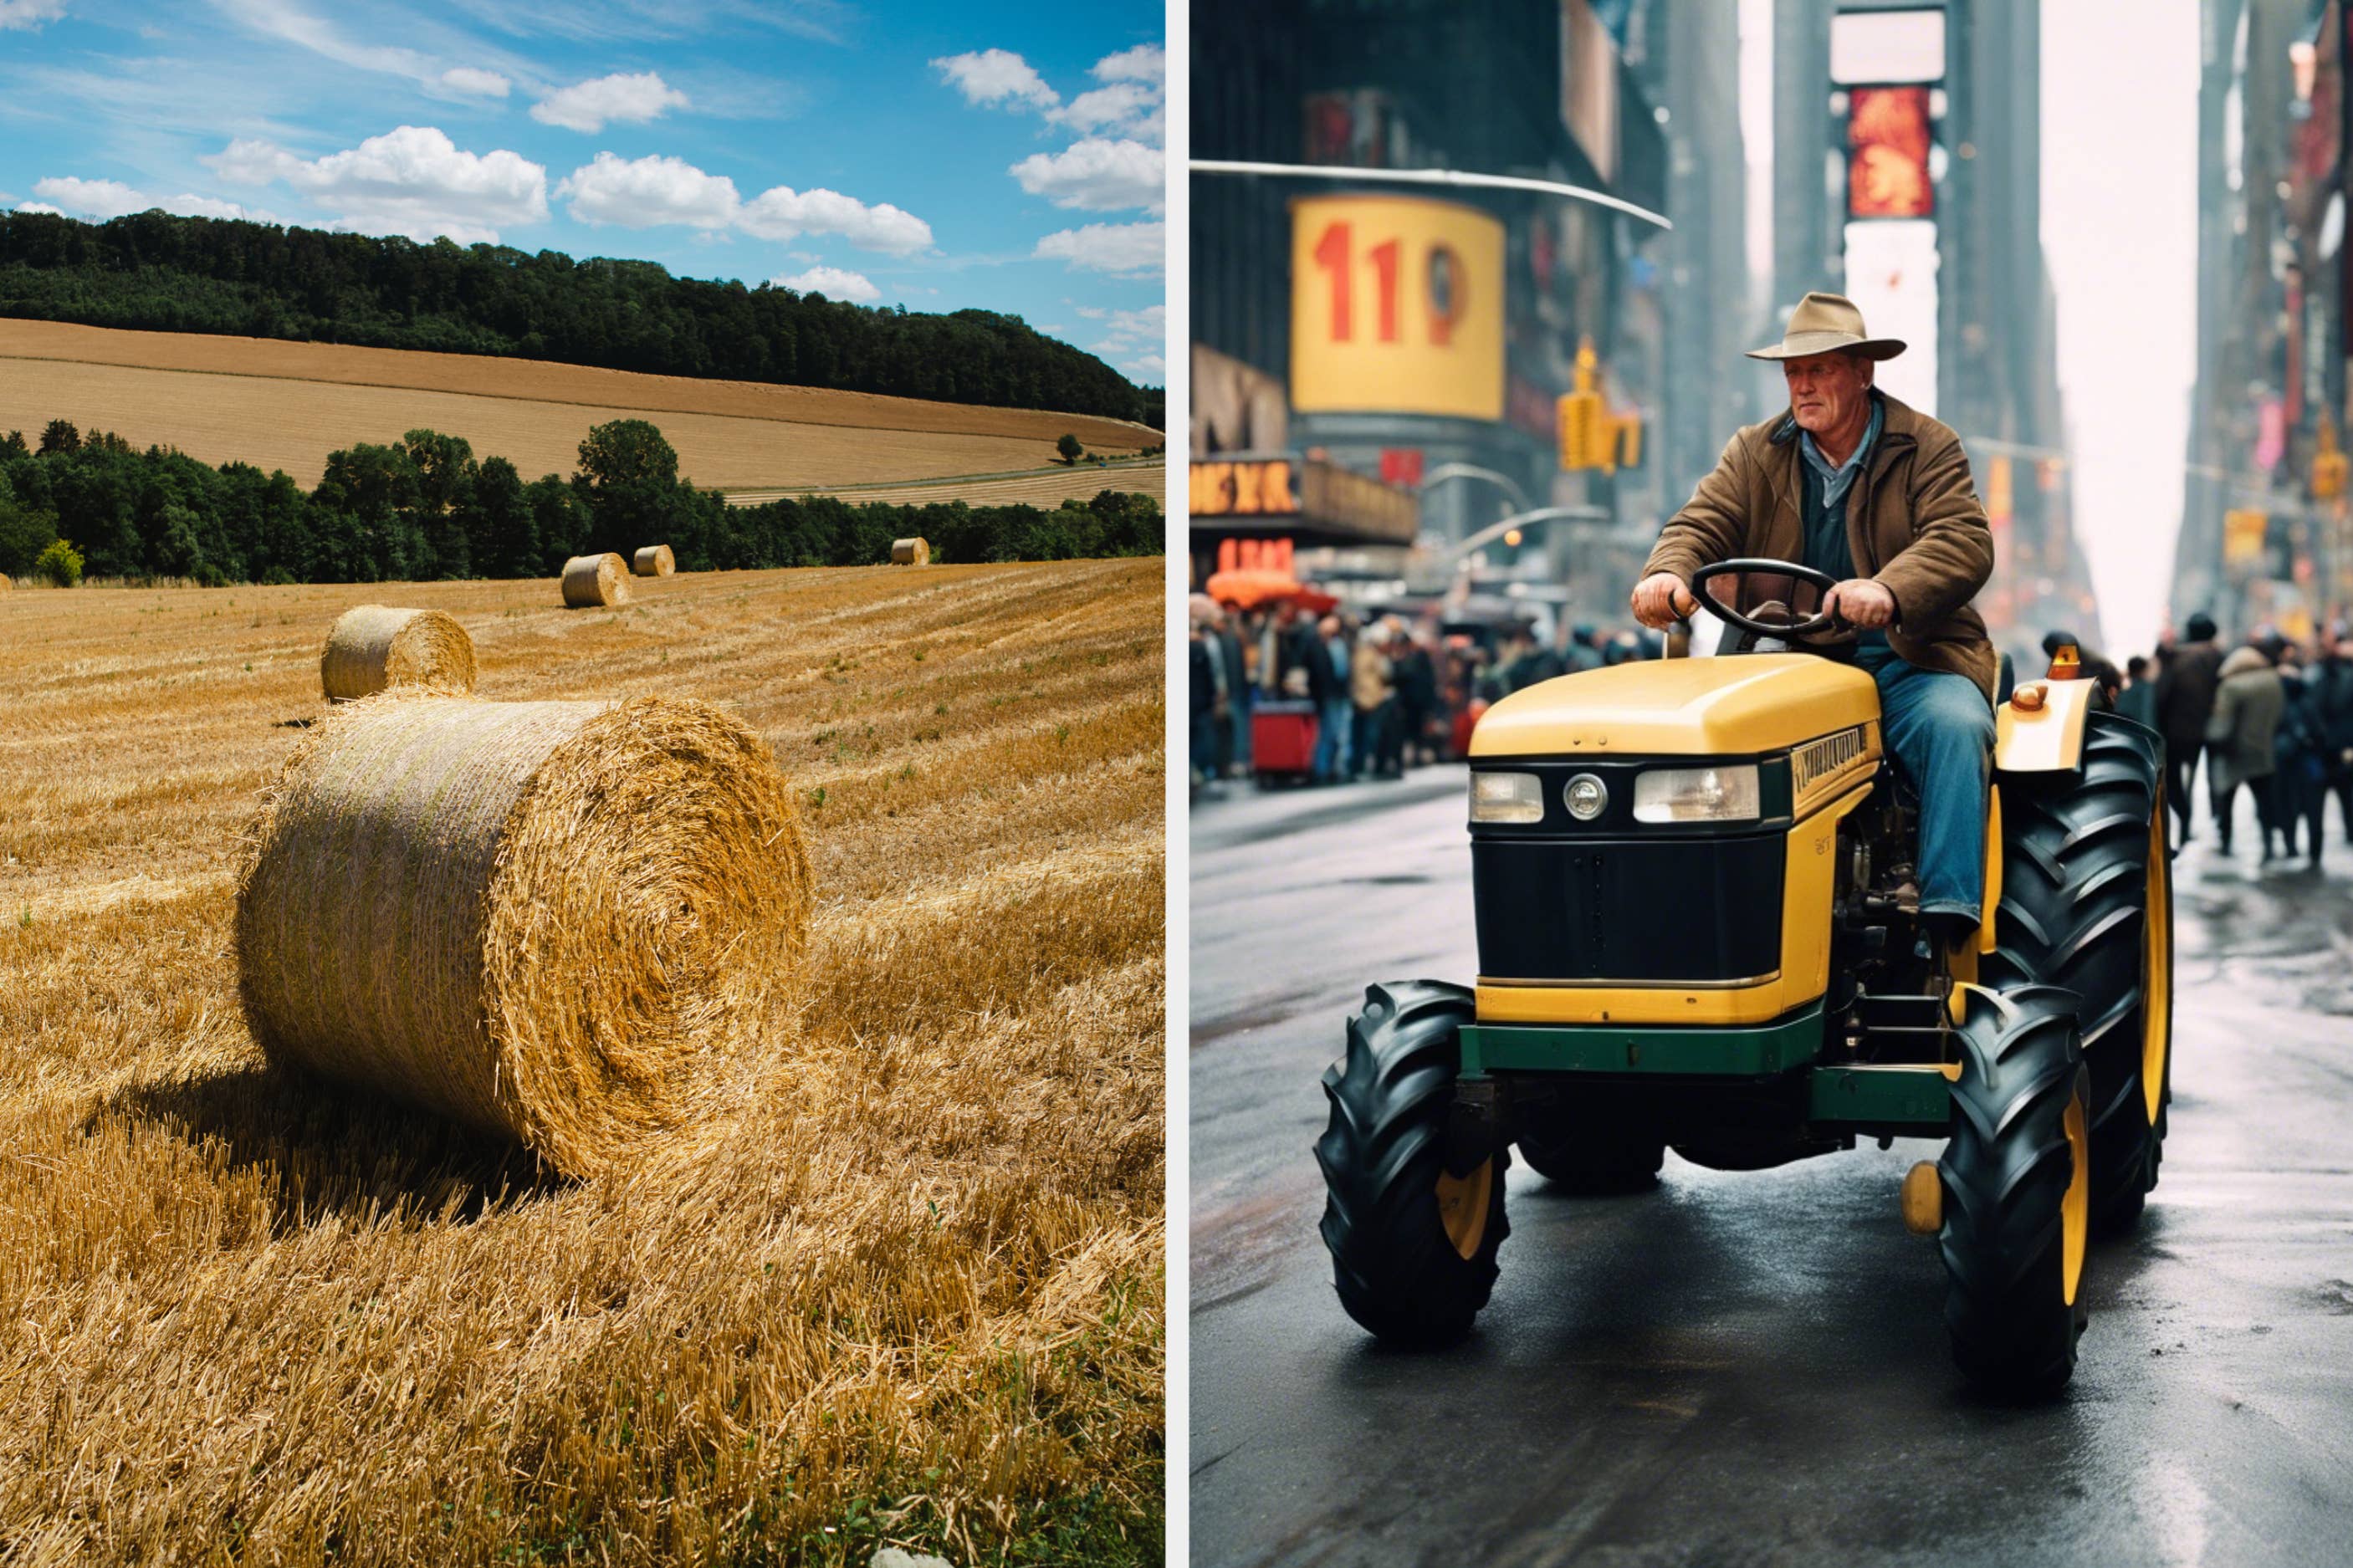 Left: Hay bales in a harvested field. Right: Man in a cowboy hat and jacket drives a yellow tractor in a busy city street